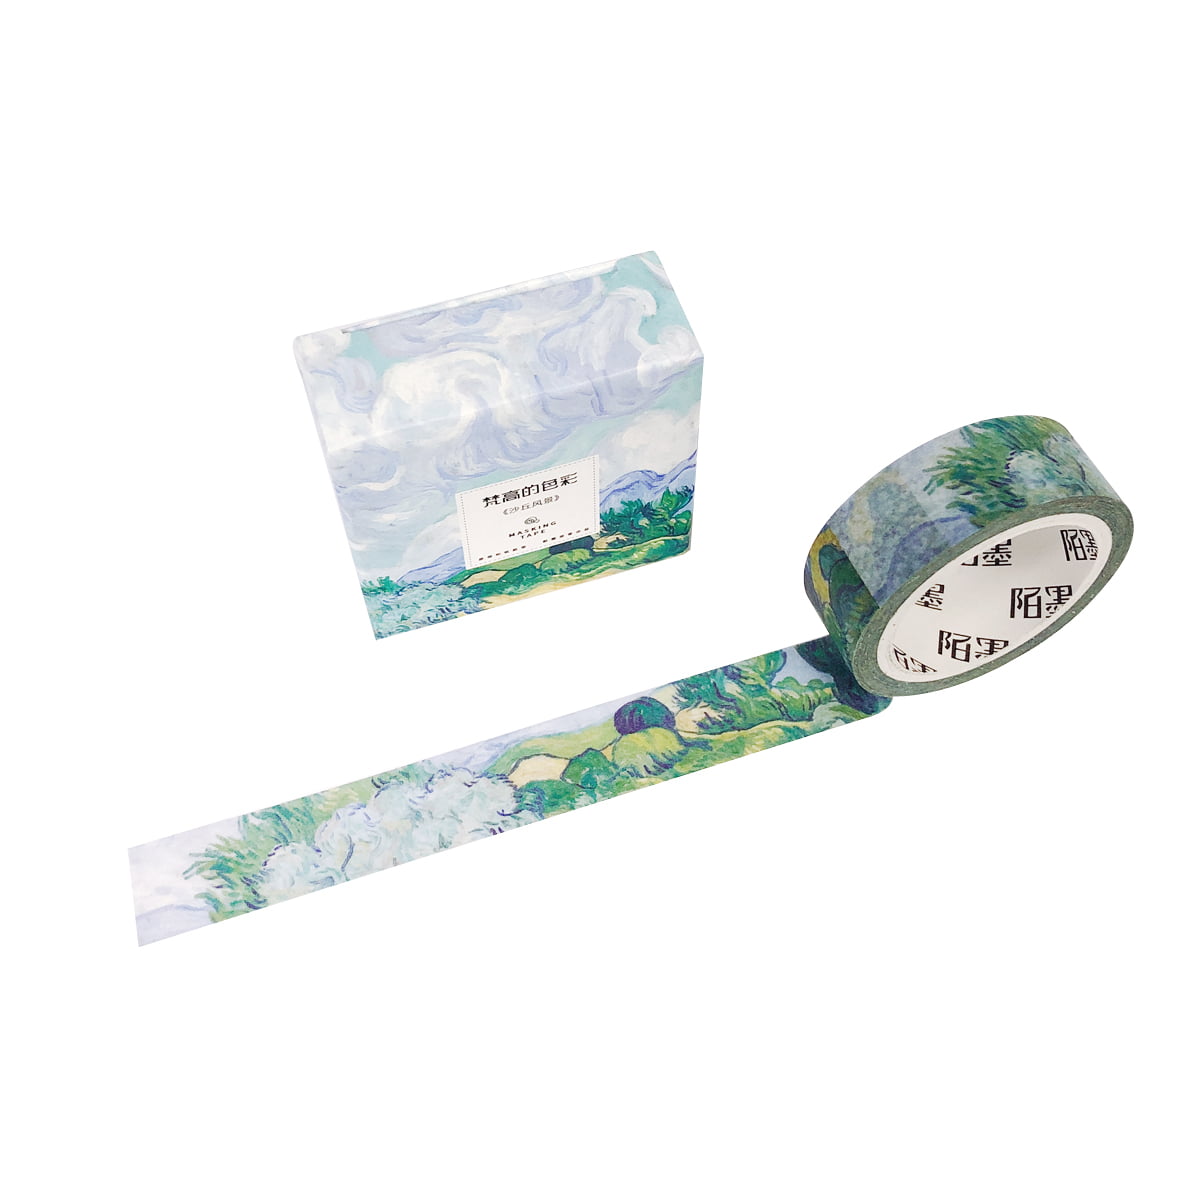 A Van Gogh Inspired Washi Masking Tape Designs Limited Edition 